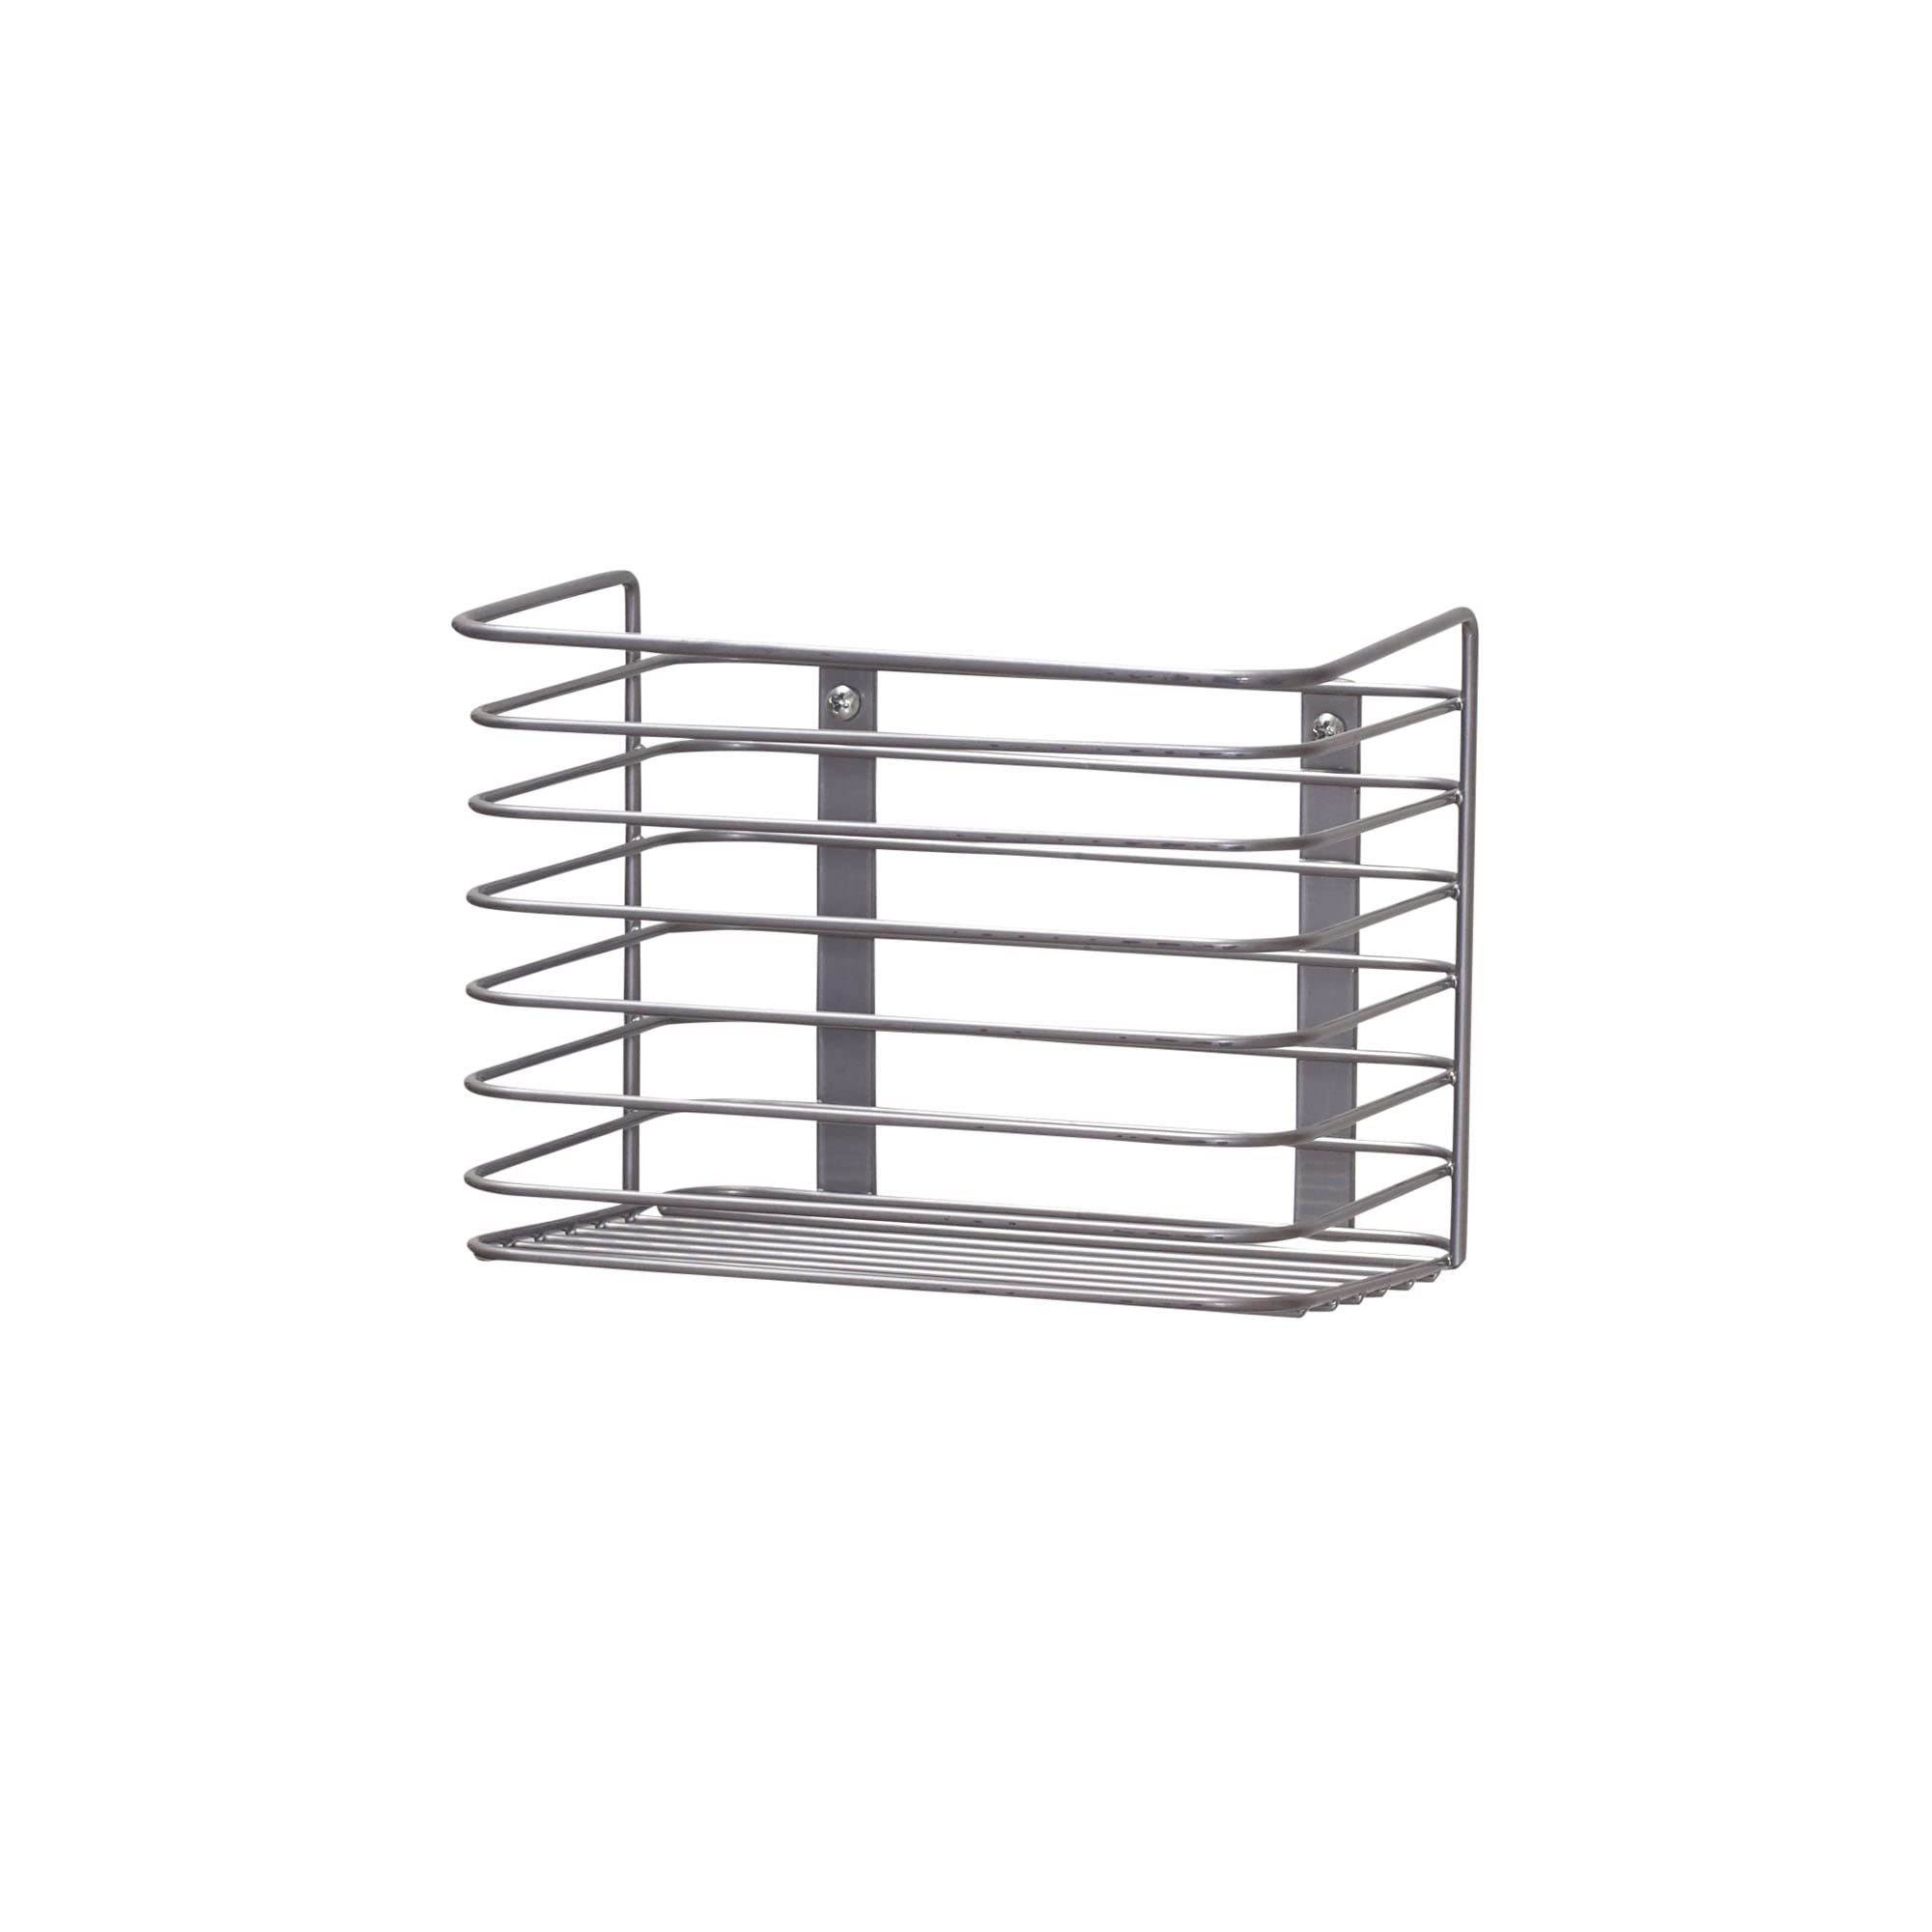 Household Essentials Door Mount Cabinet Organizer, Steel Wire Basket, Attractive Nickel Powder Coating, Great for Saving Space, Mounts to Solid Surface with Hardware Included